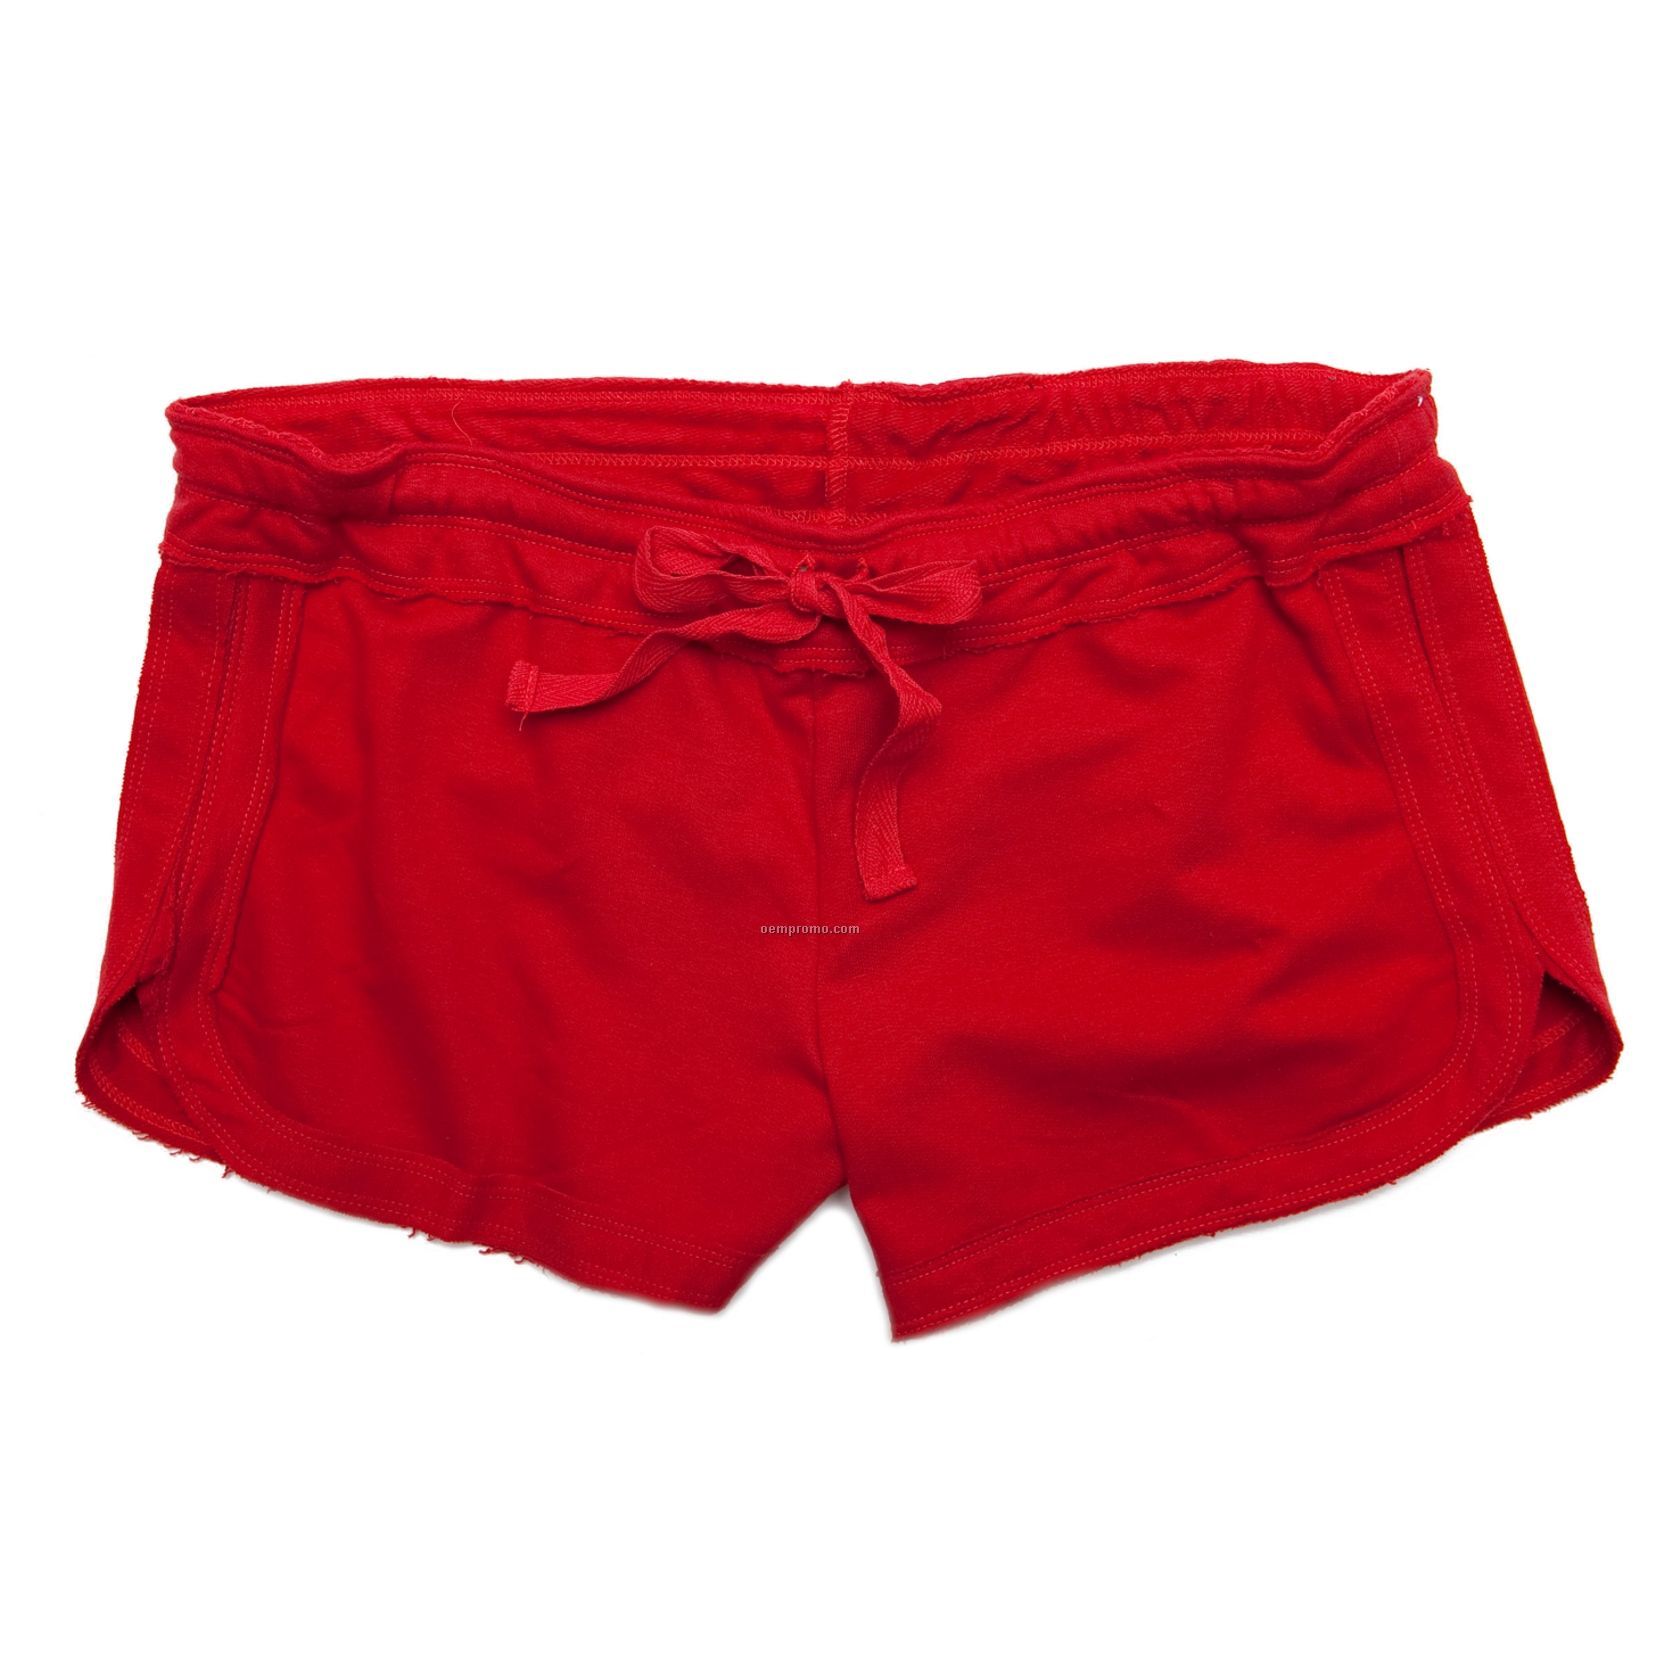 Adult Red Chrissy Shorts